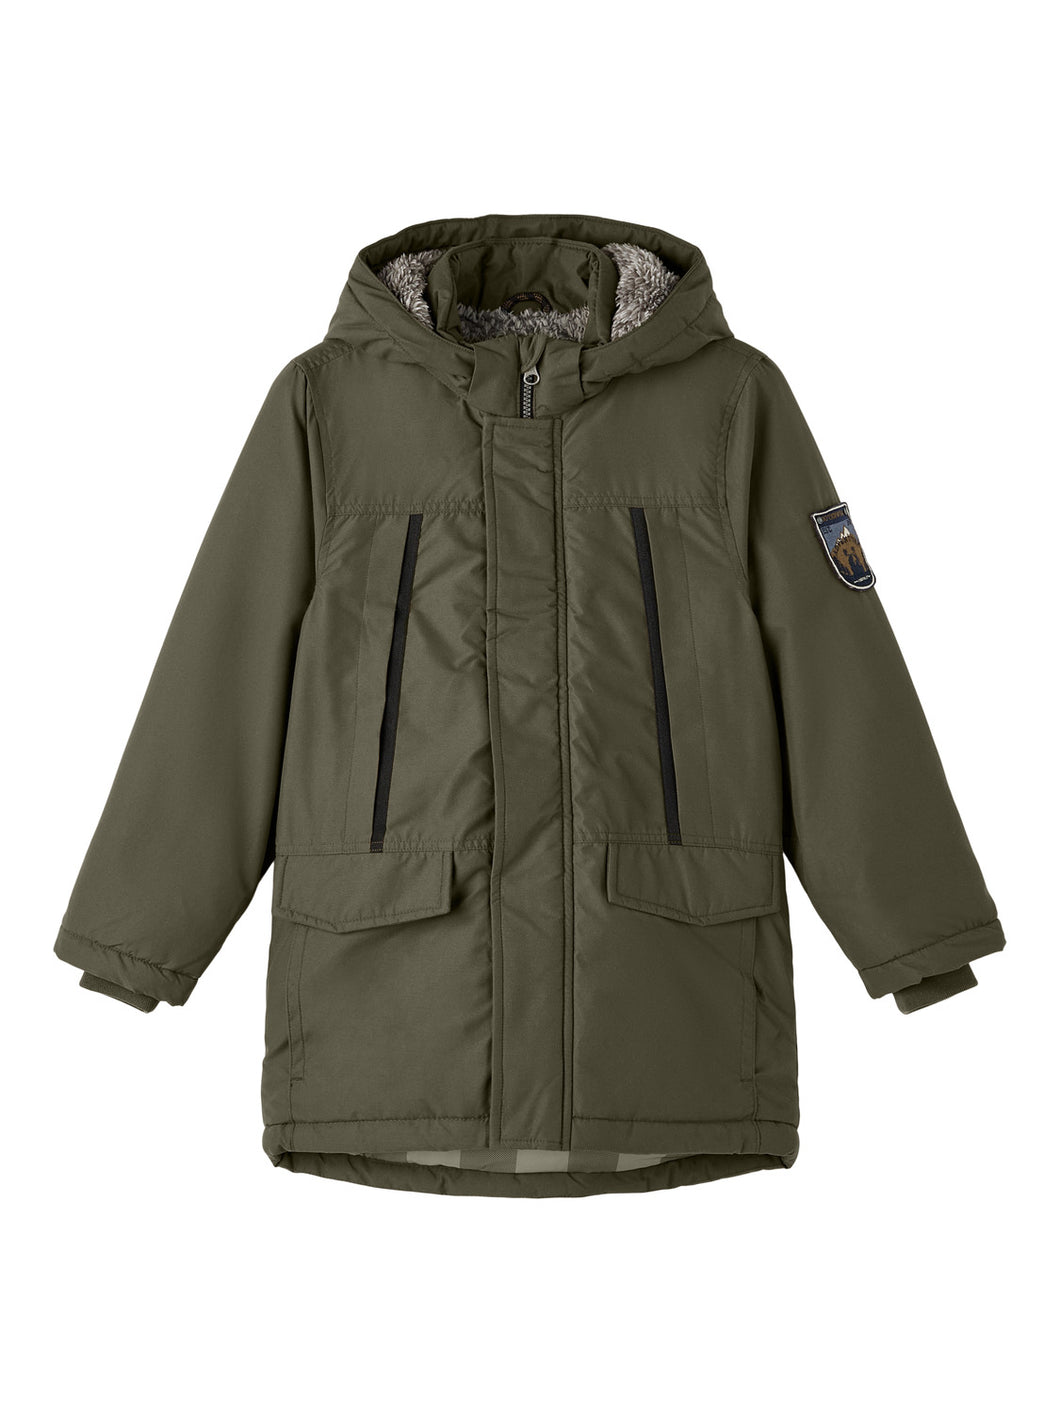 NKMMILLER Outerwear - Olive Night